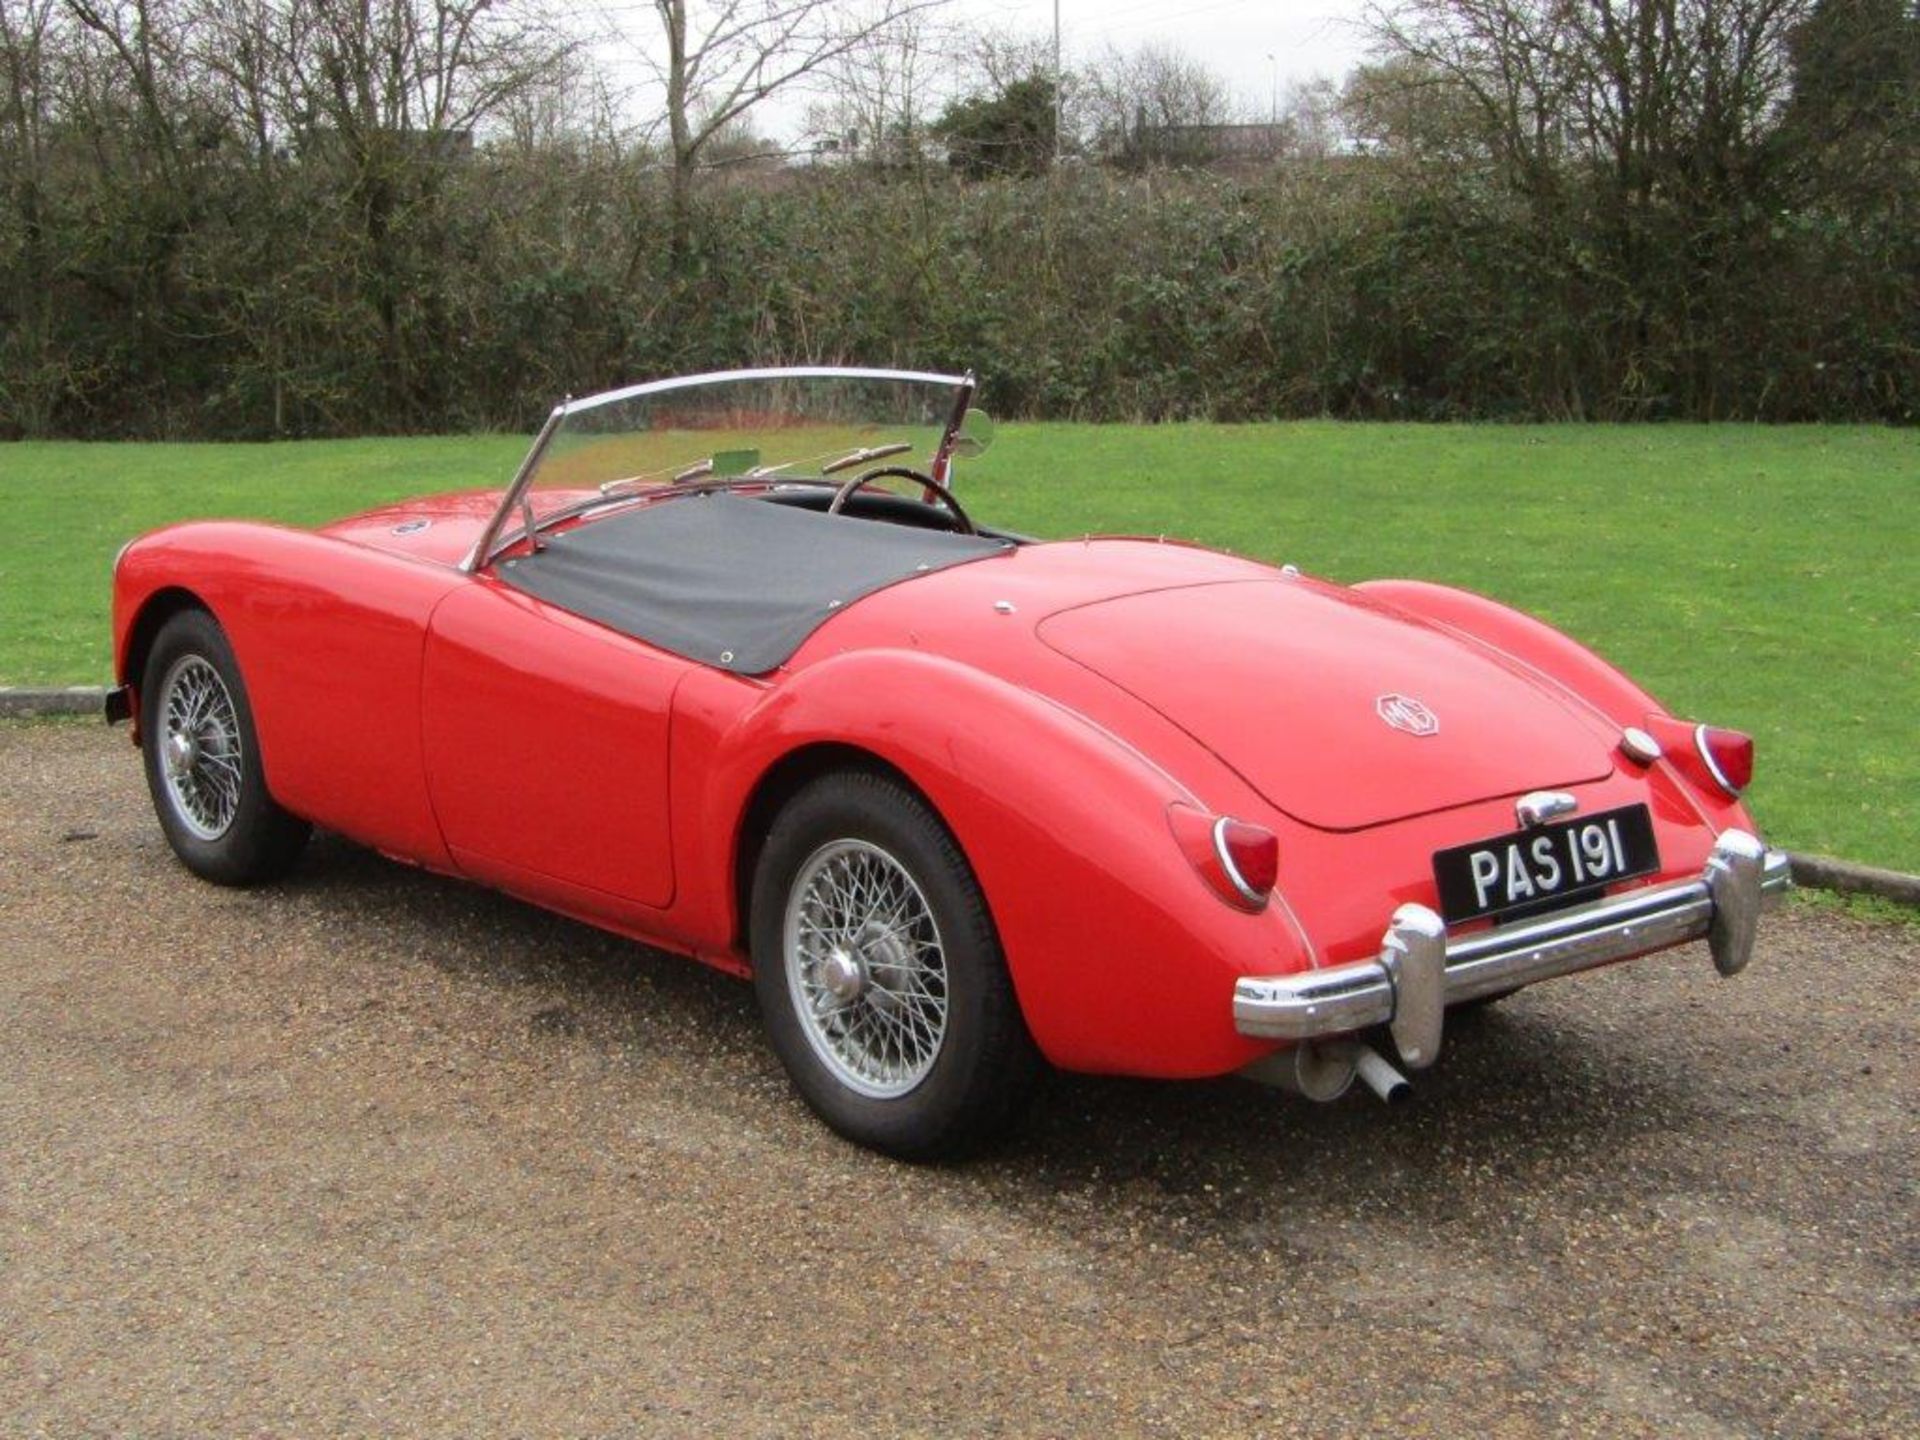 1958 MG A 1500 Roadster - Image 7 of 9